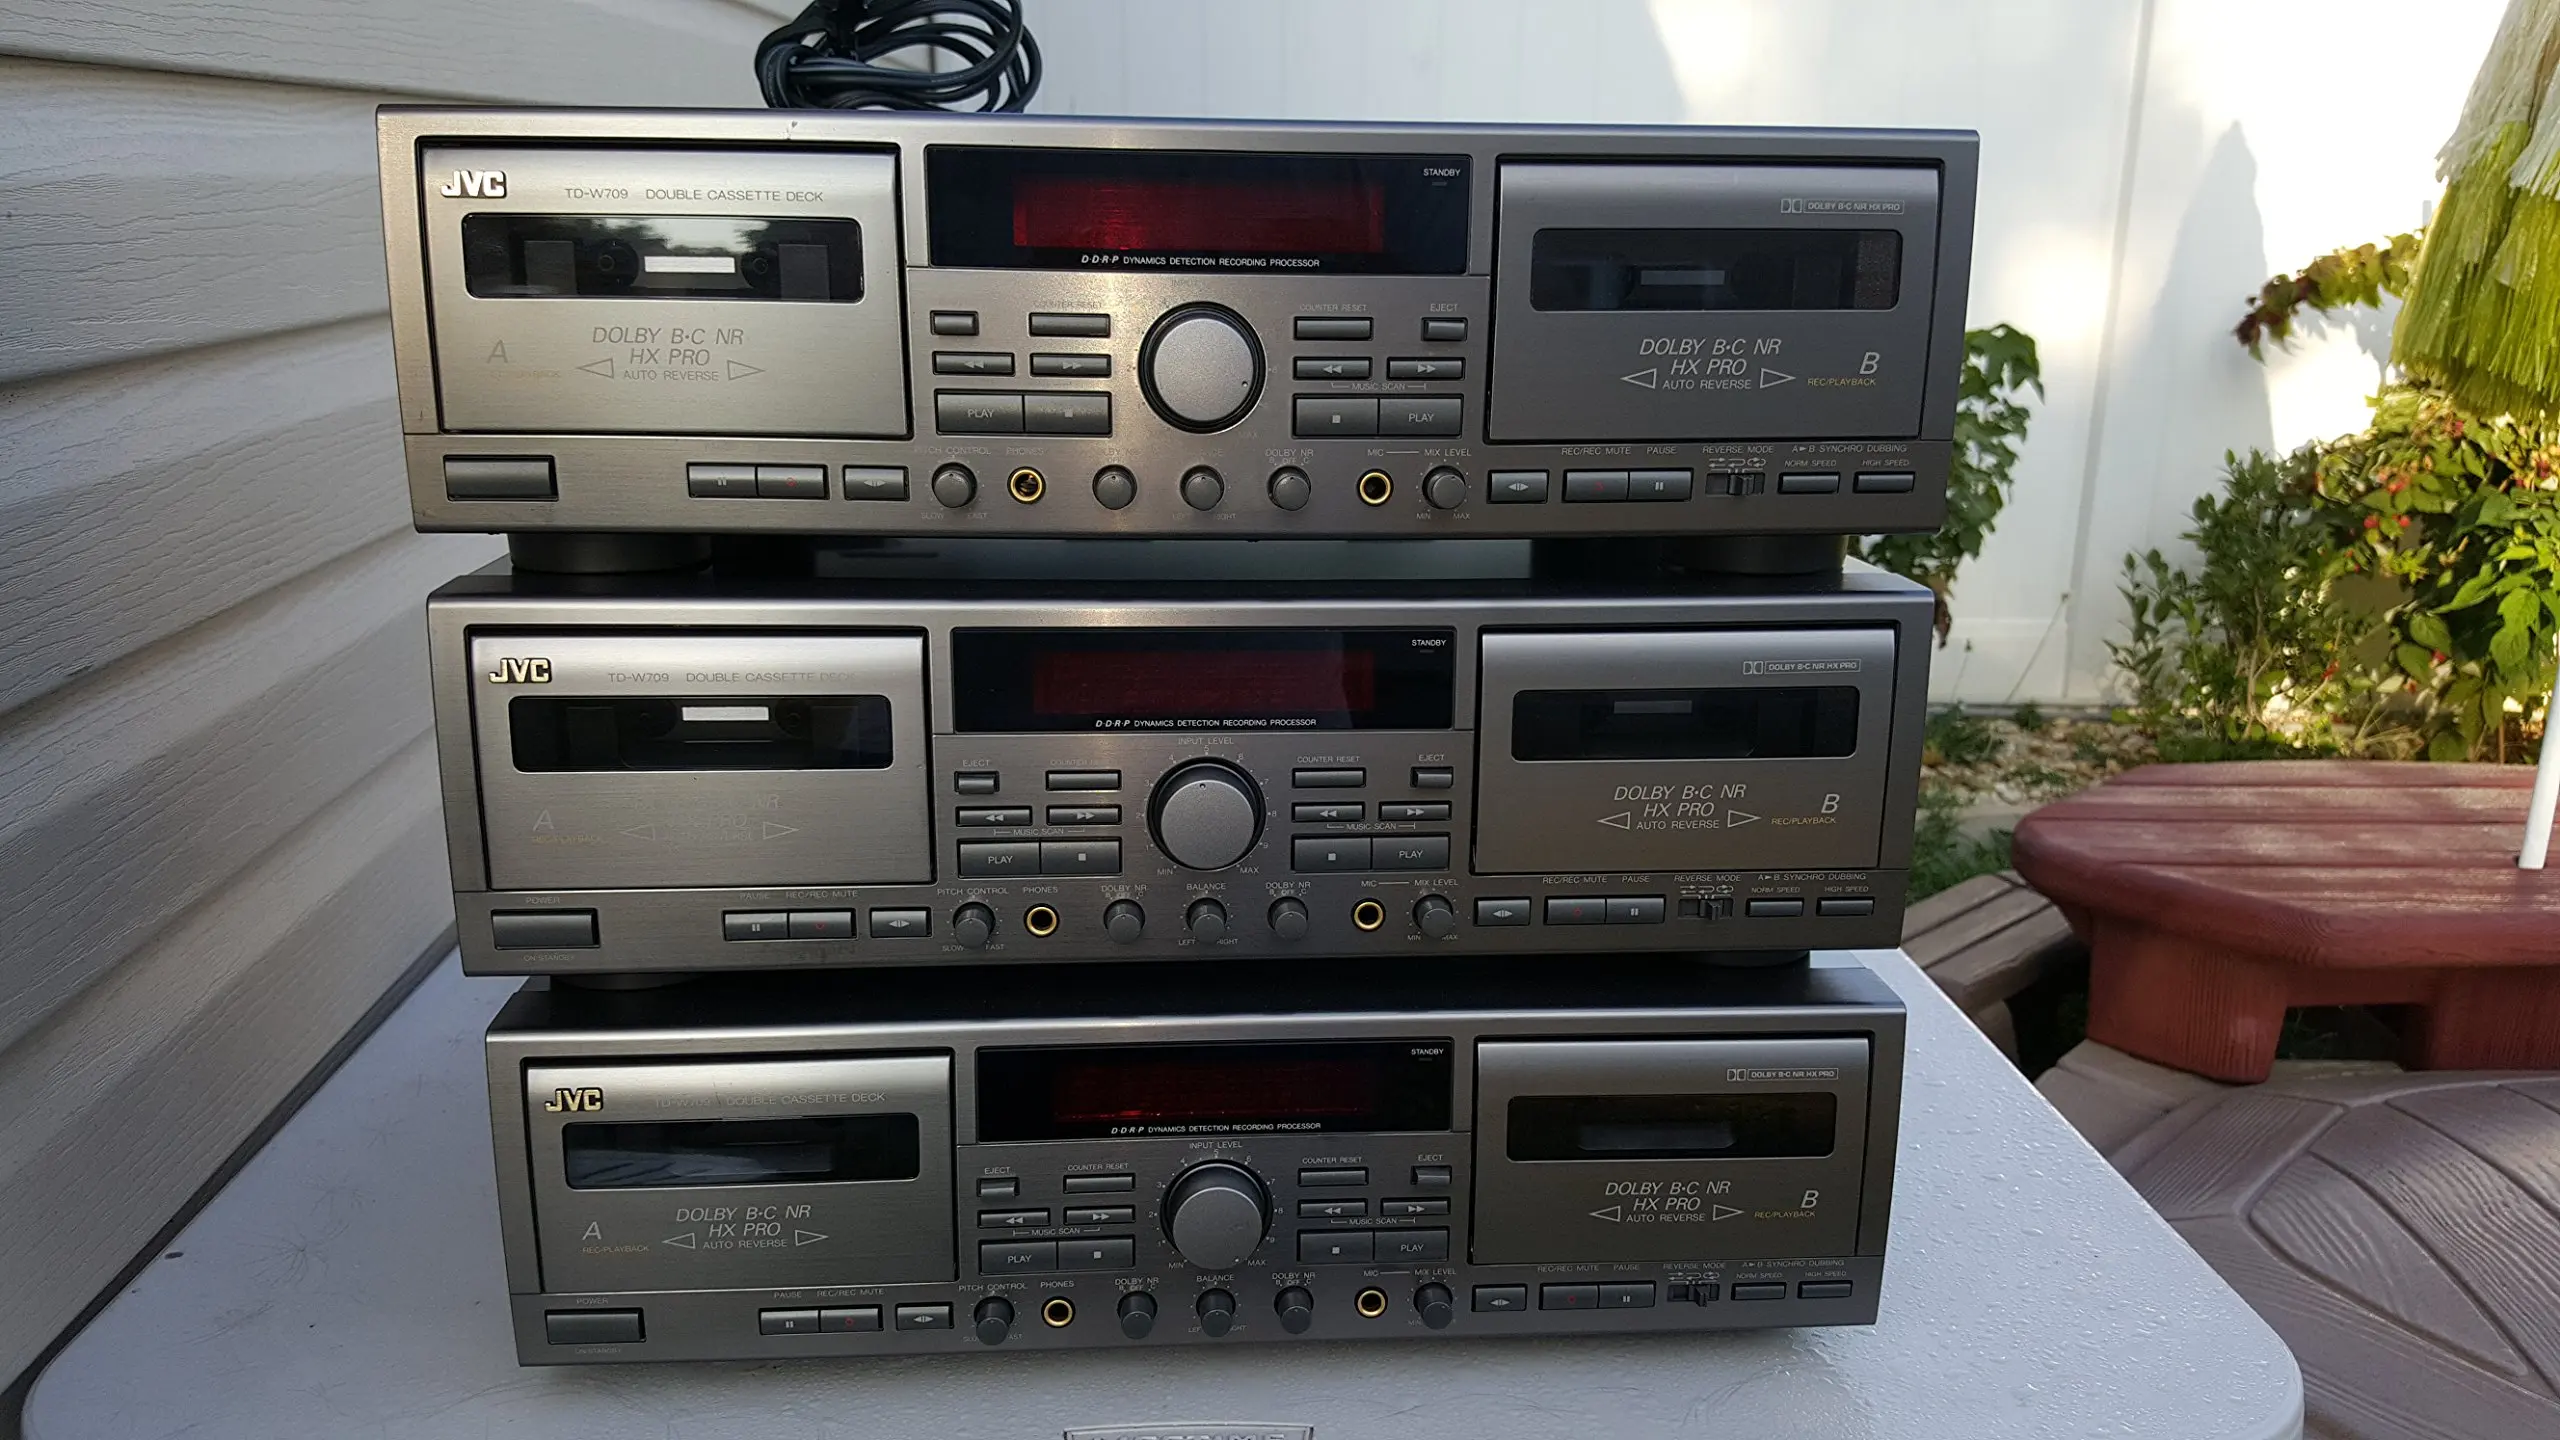 Buy Jvc Td W709 Double Cassette Deck Player Recorder Dolby System B C Nr Hx Pro Ddrp Dynamics Detection Recording Processor Twin Recording And Auto Reverse In Cheap Price On Alibaba Com